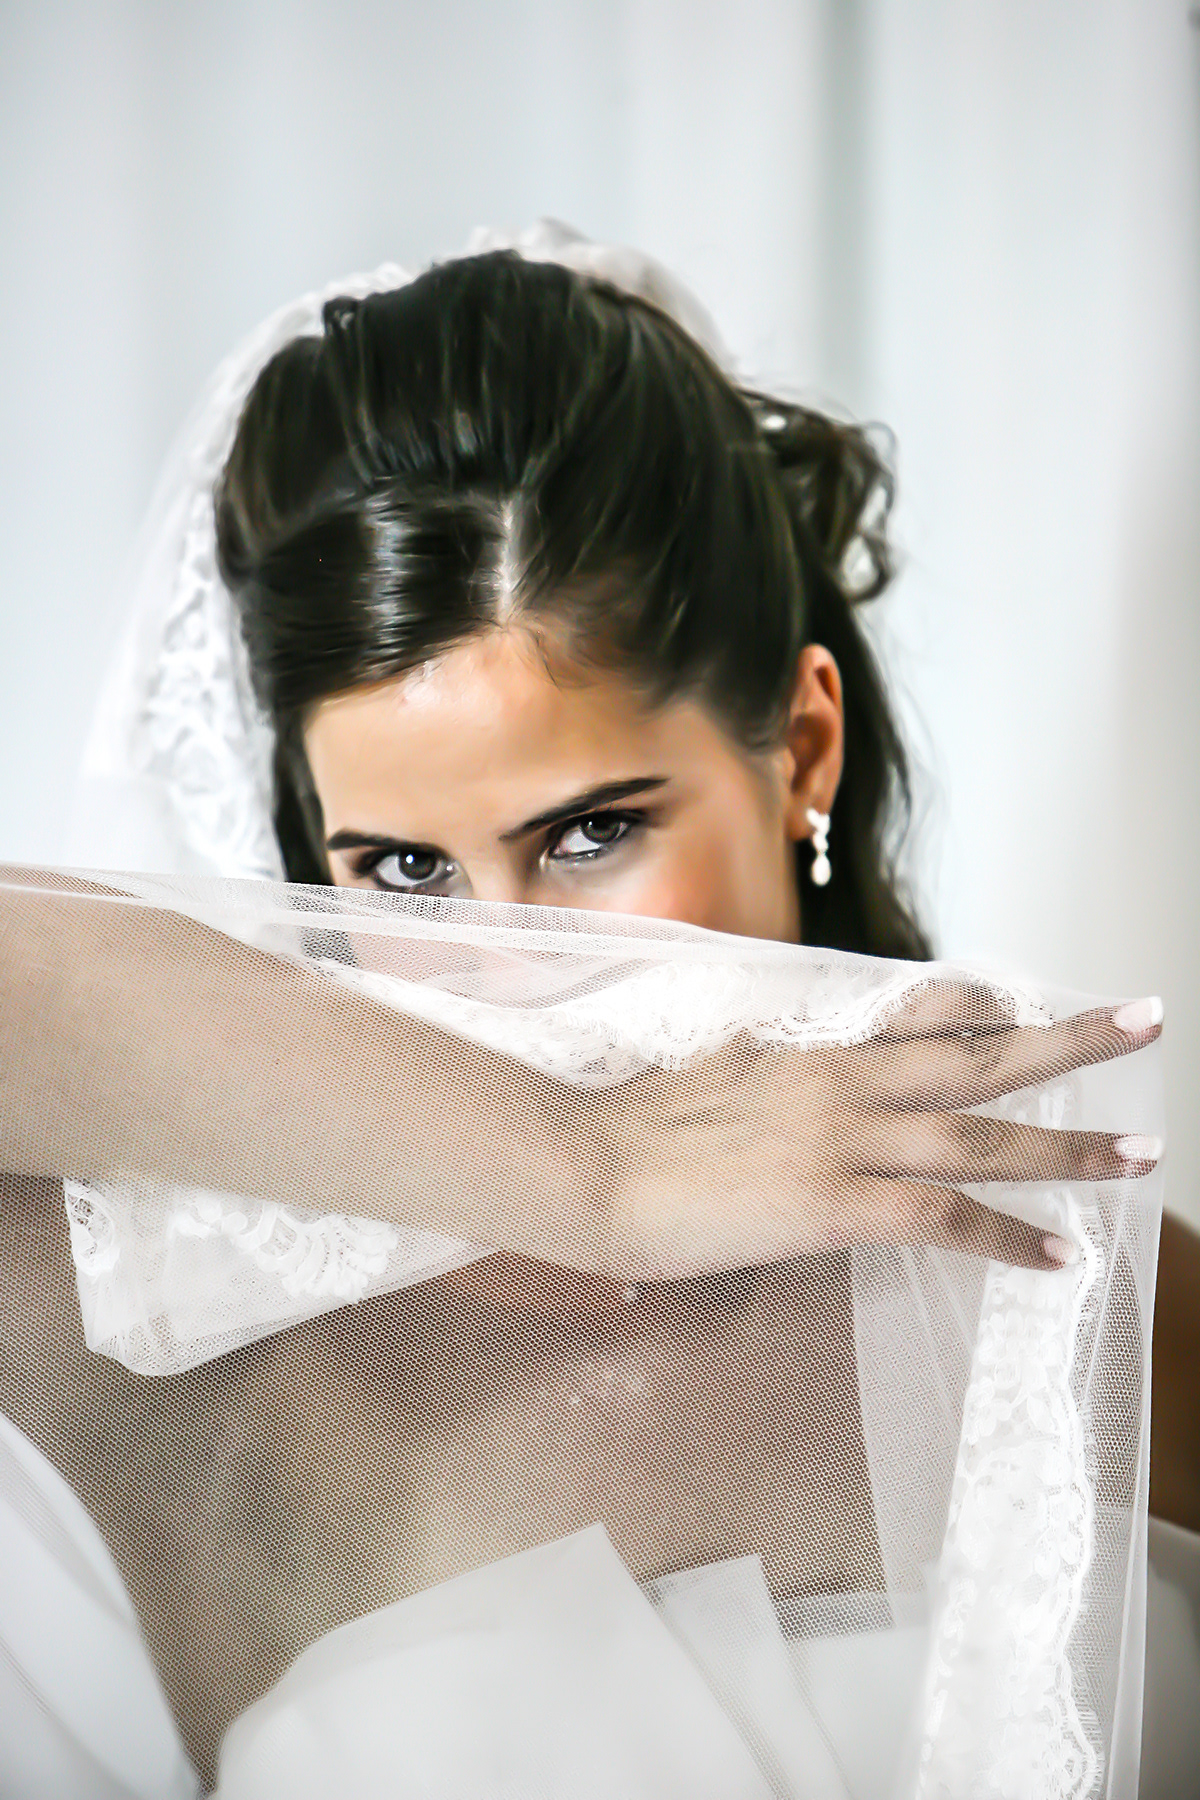 wedding bride noivo noiva party photo foto story Love amor Magic   magia memories forever together